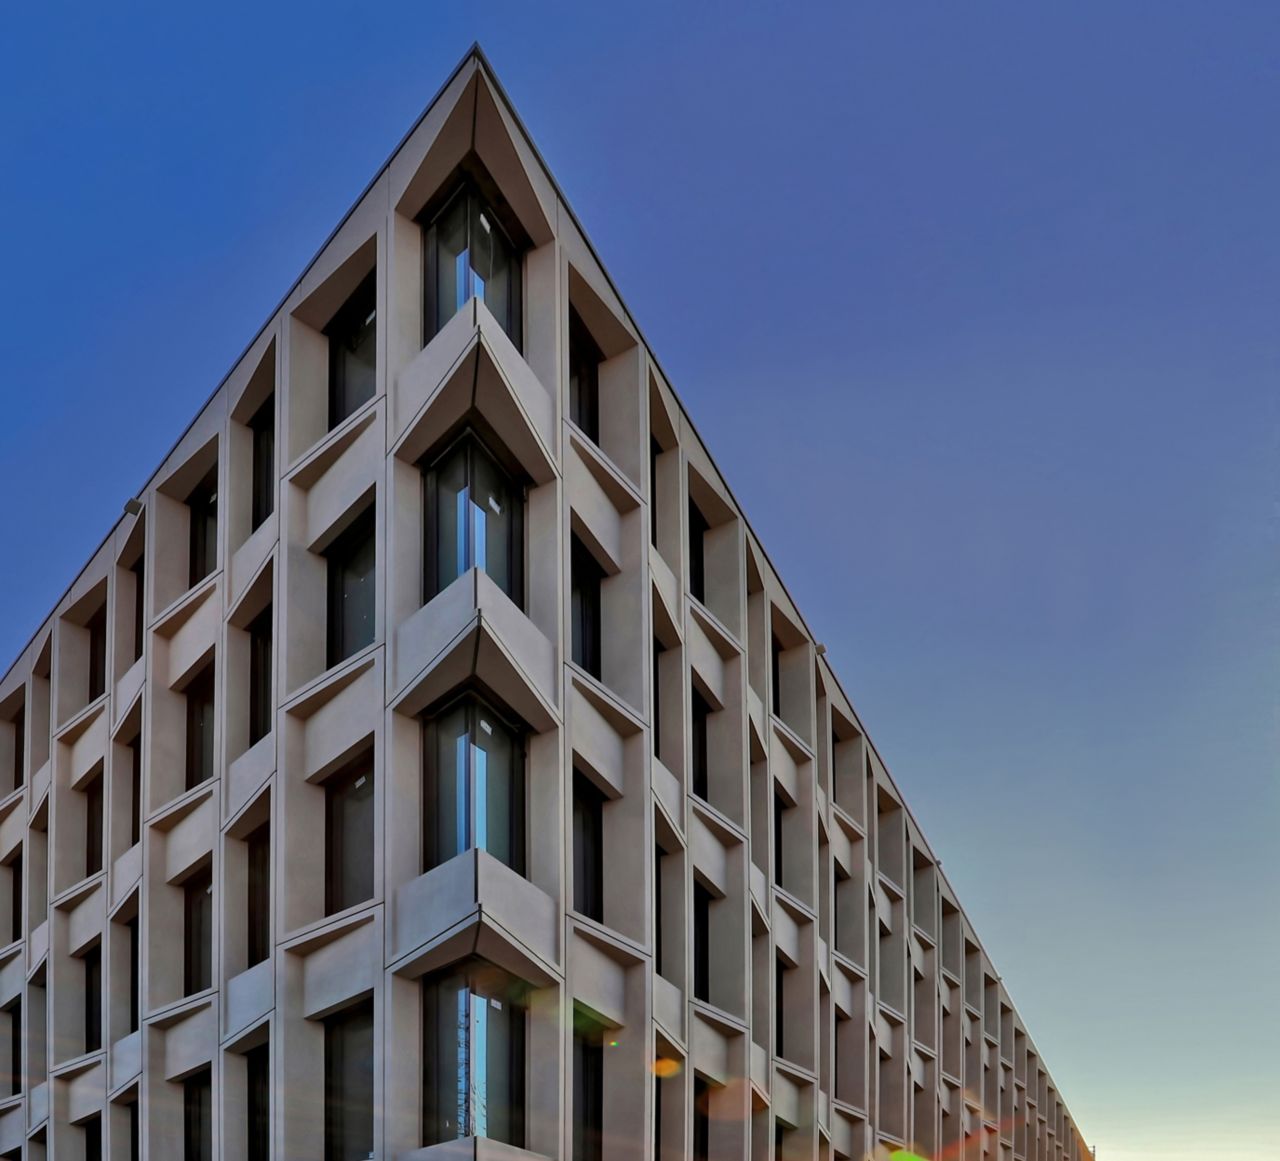 Precast colored concrete facade with Sika concrete admixtures at Limmat building in Zurich